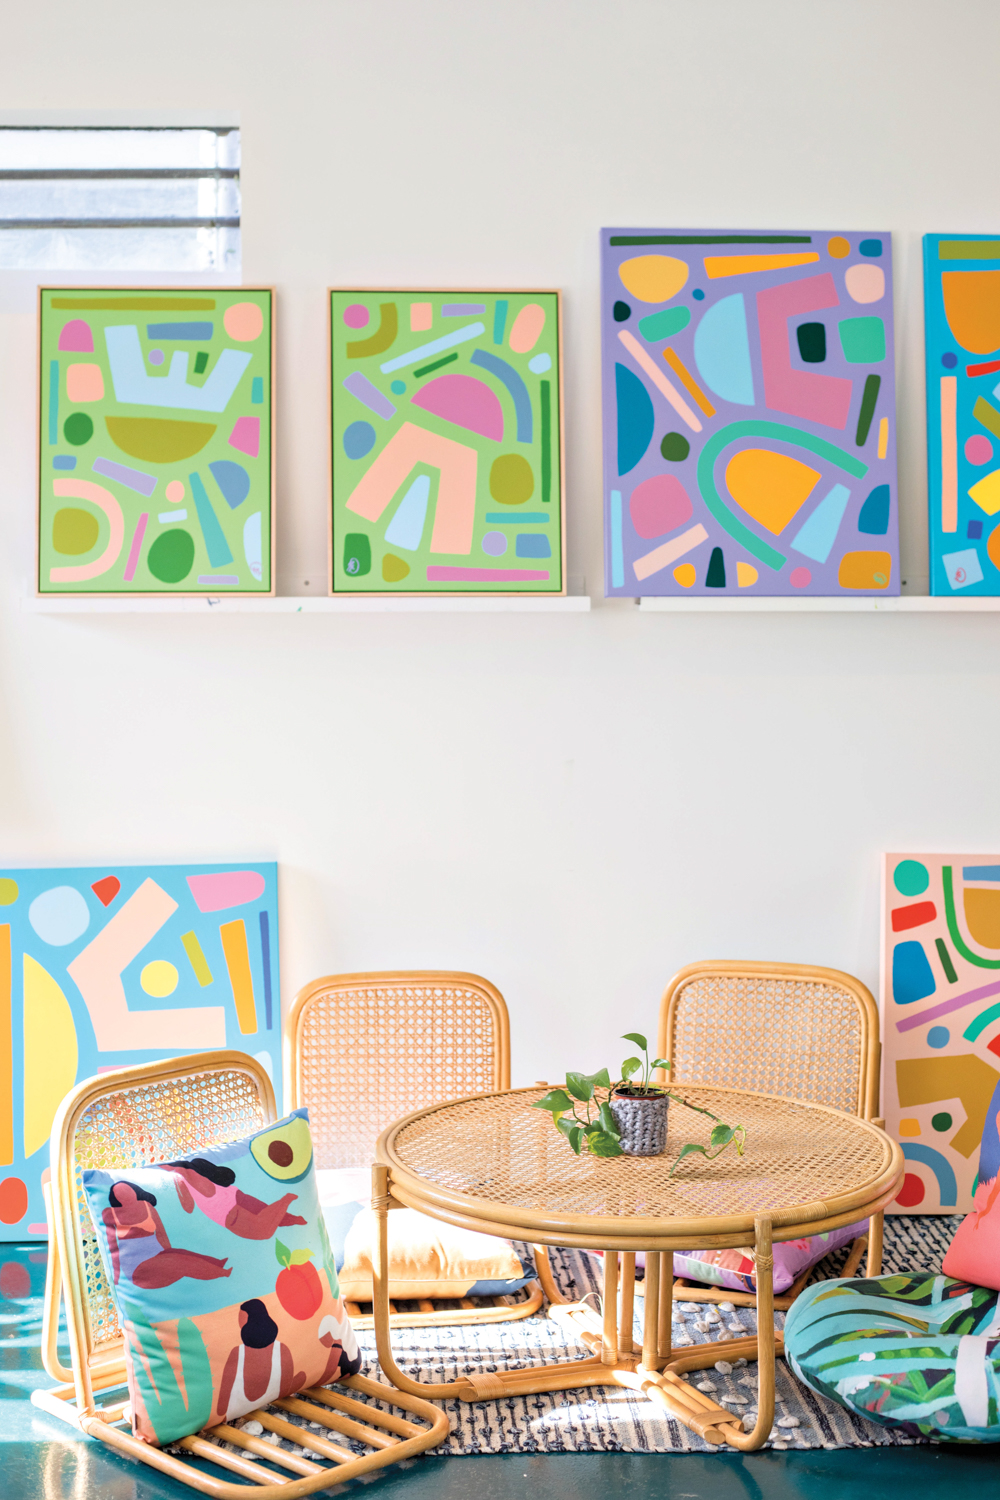 Colorful abstract artwork on ledge shelves and resting on the floor behind low-to-the-ground chairs and table